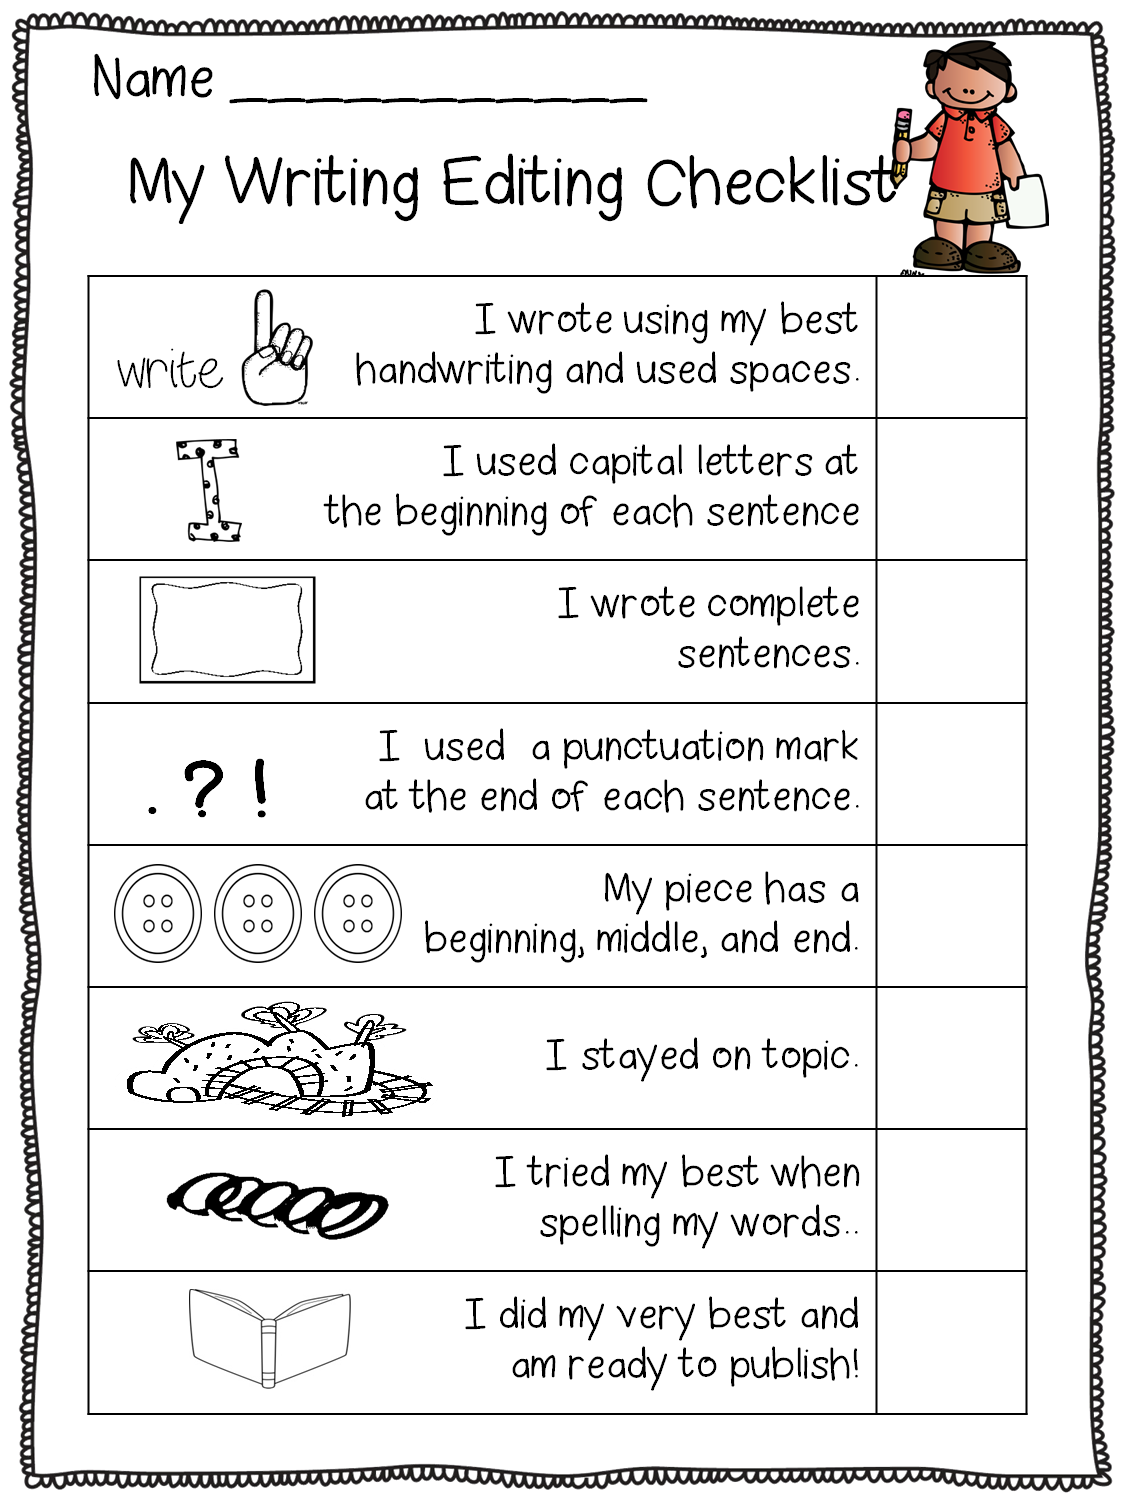 This is part of. Evaluation clipart checklist student